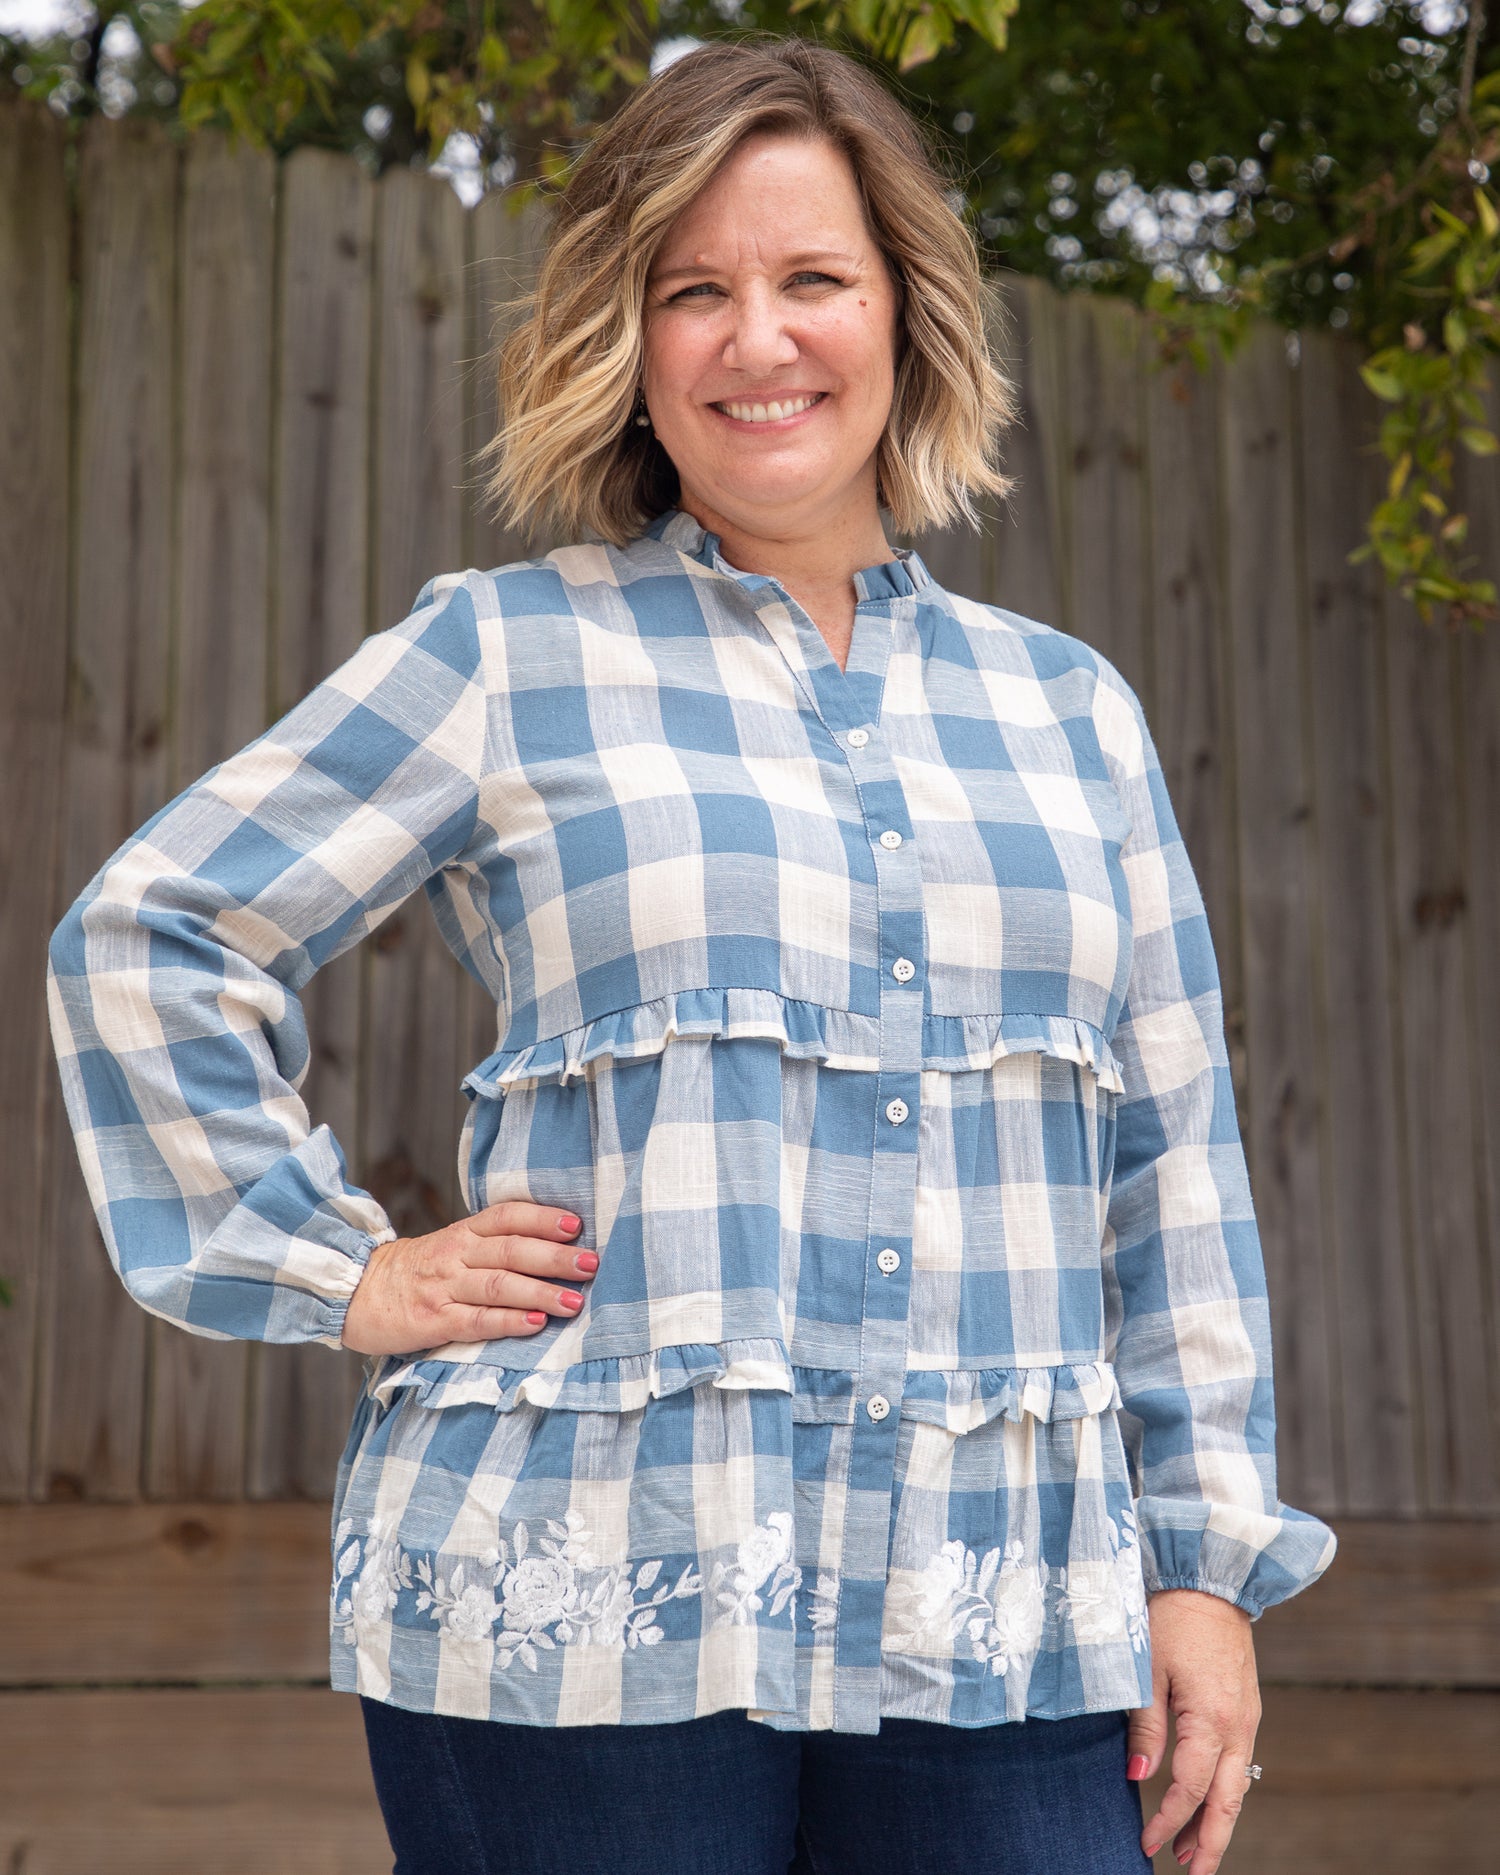 Blue Gingham Everly Long Sleeve Top